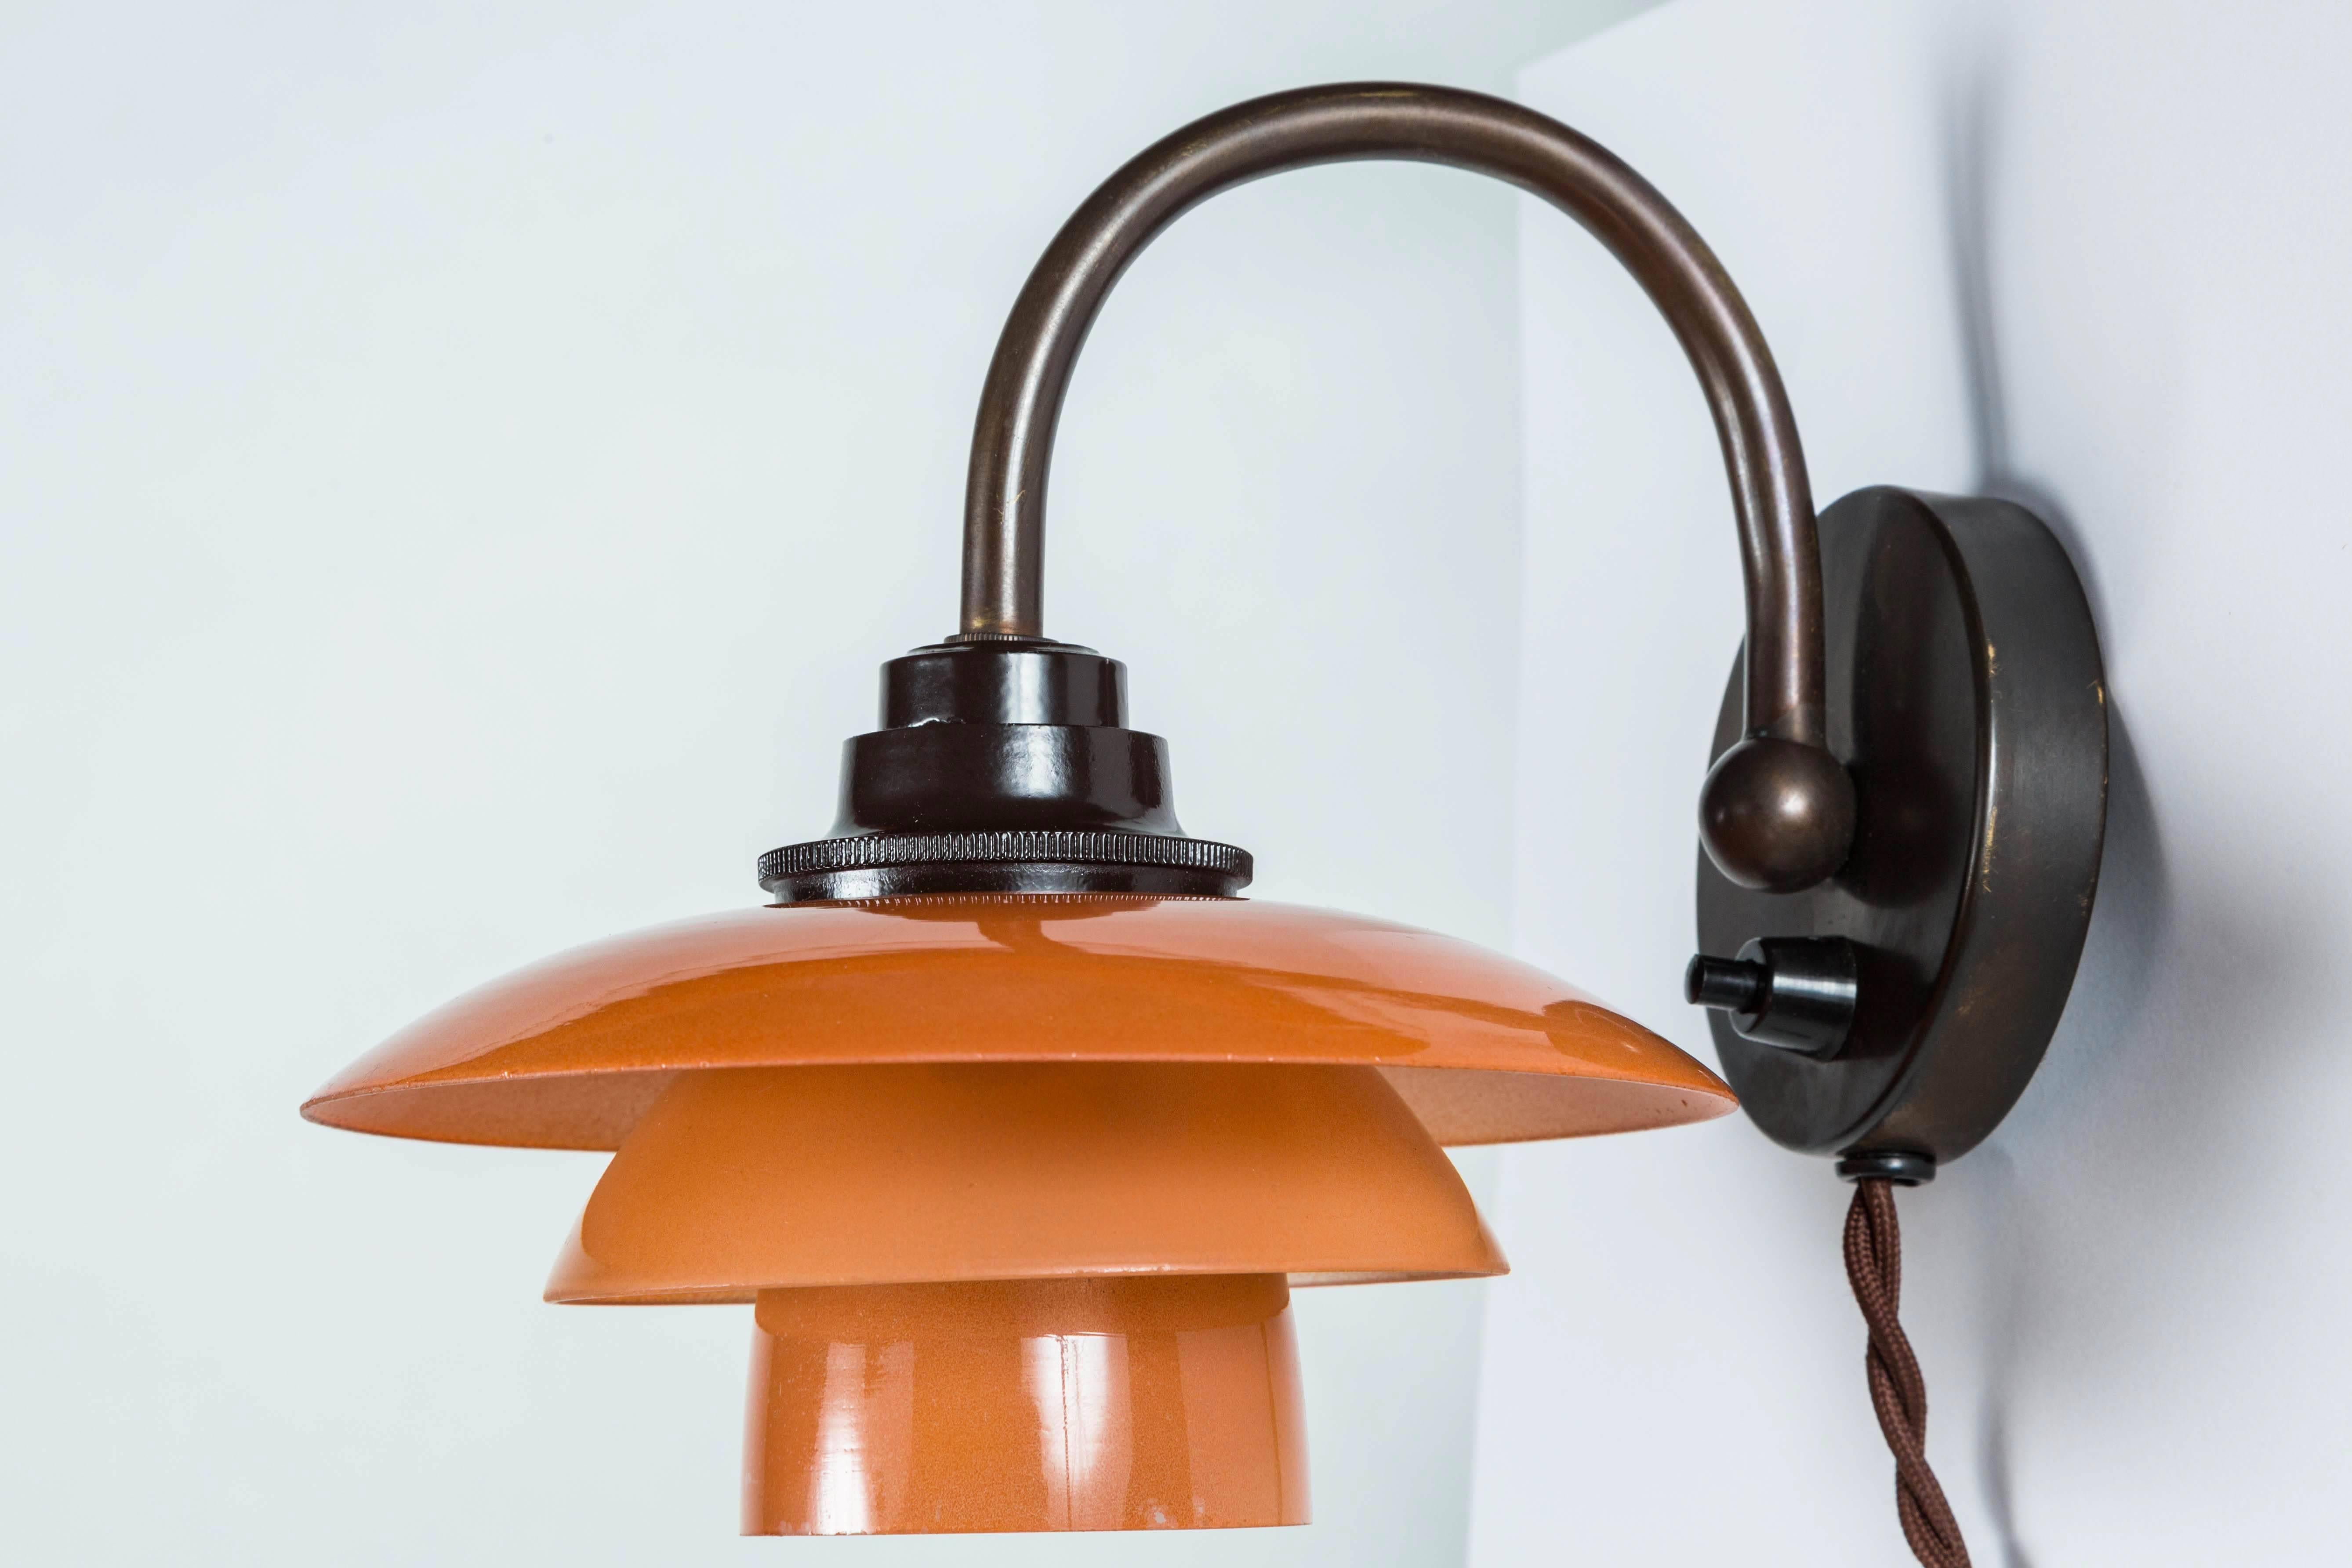 Downward wall lamp by Poul Henningsen. Model PH-1. Curved browned brass arm with salmon colored matte glass shade. Bakelite socket cover. Denmark, circa 1933. 
 